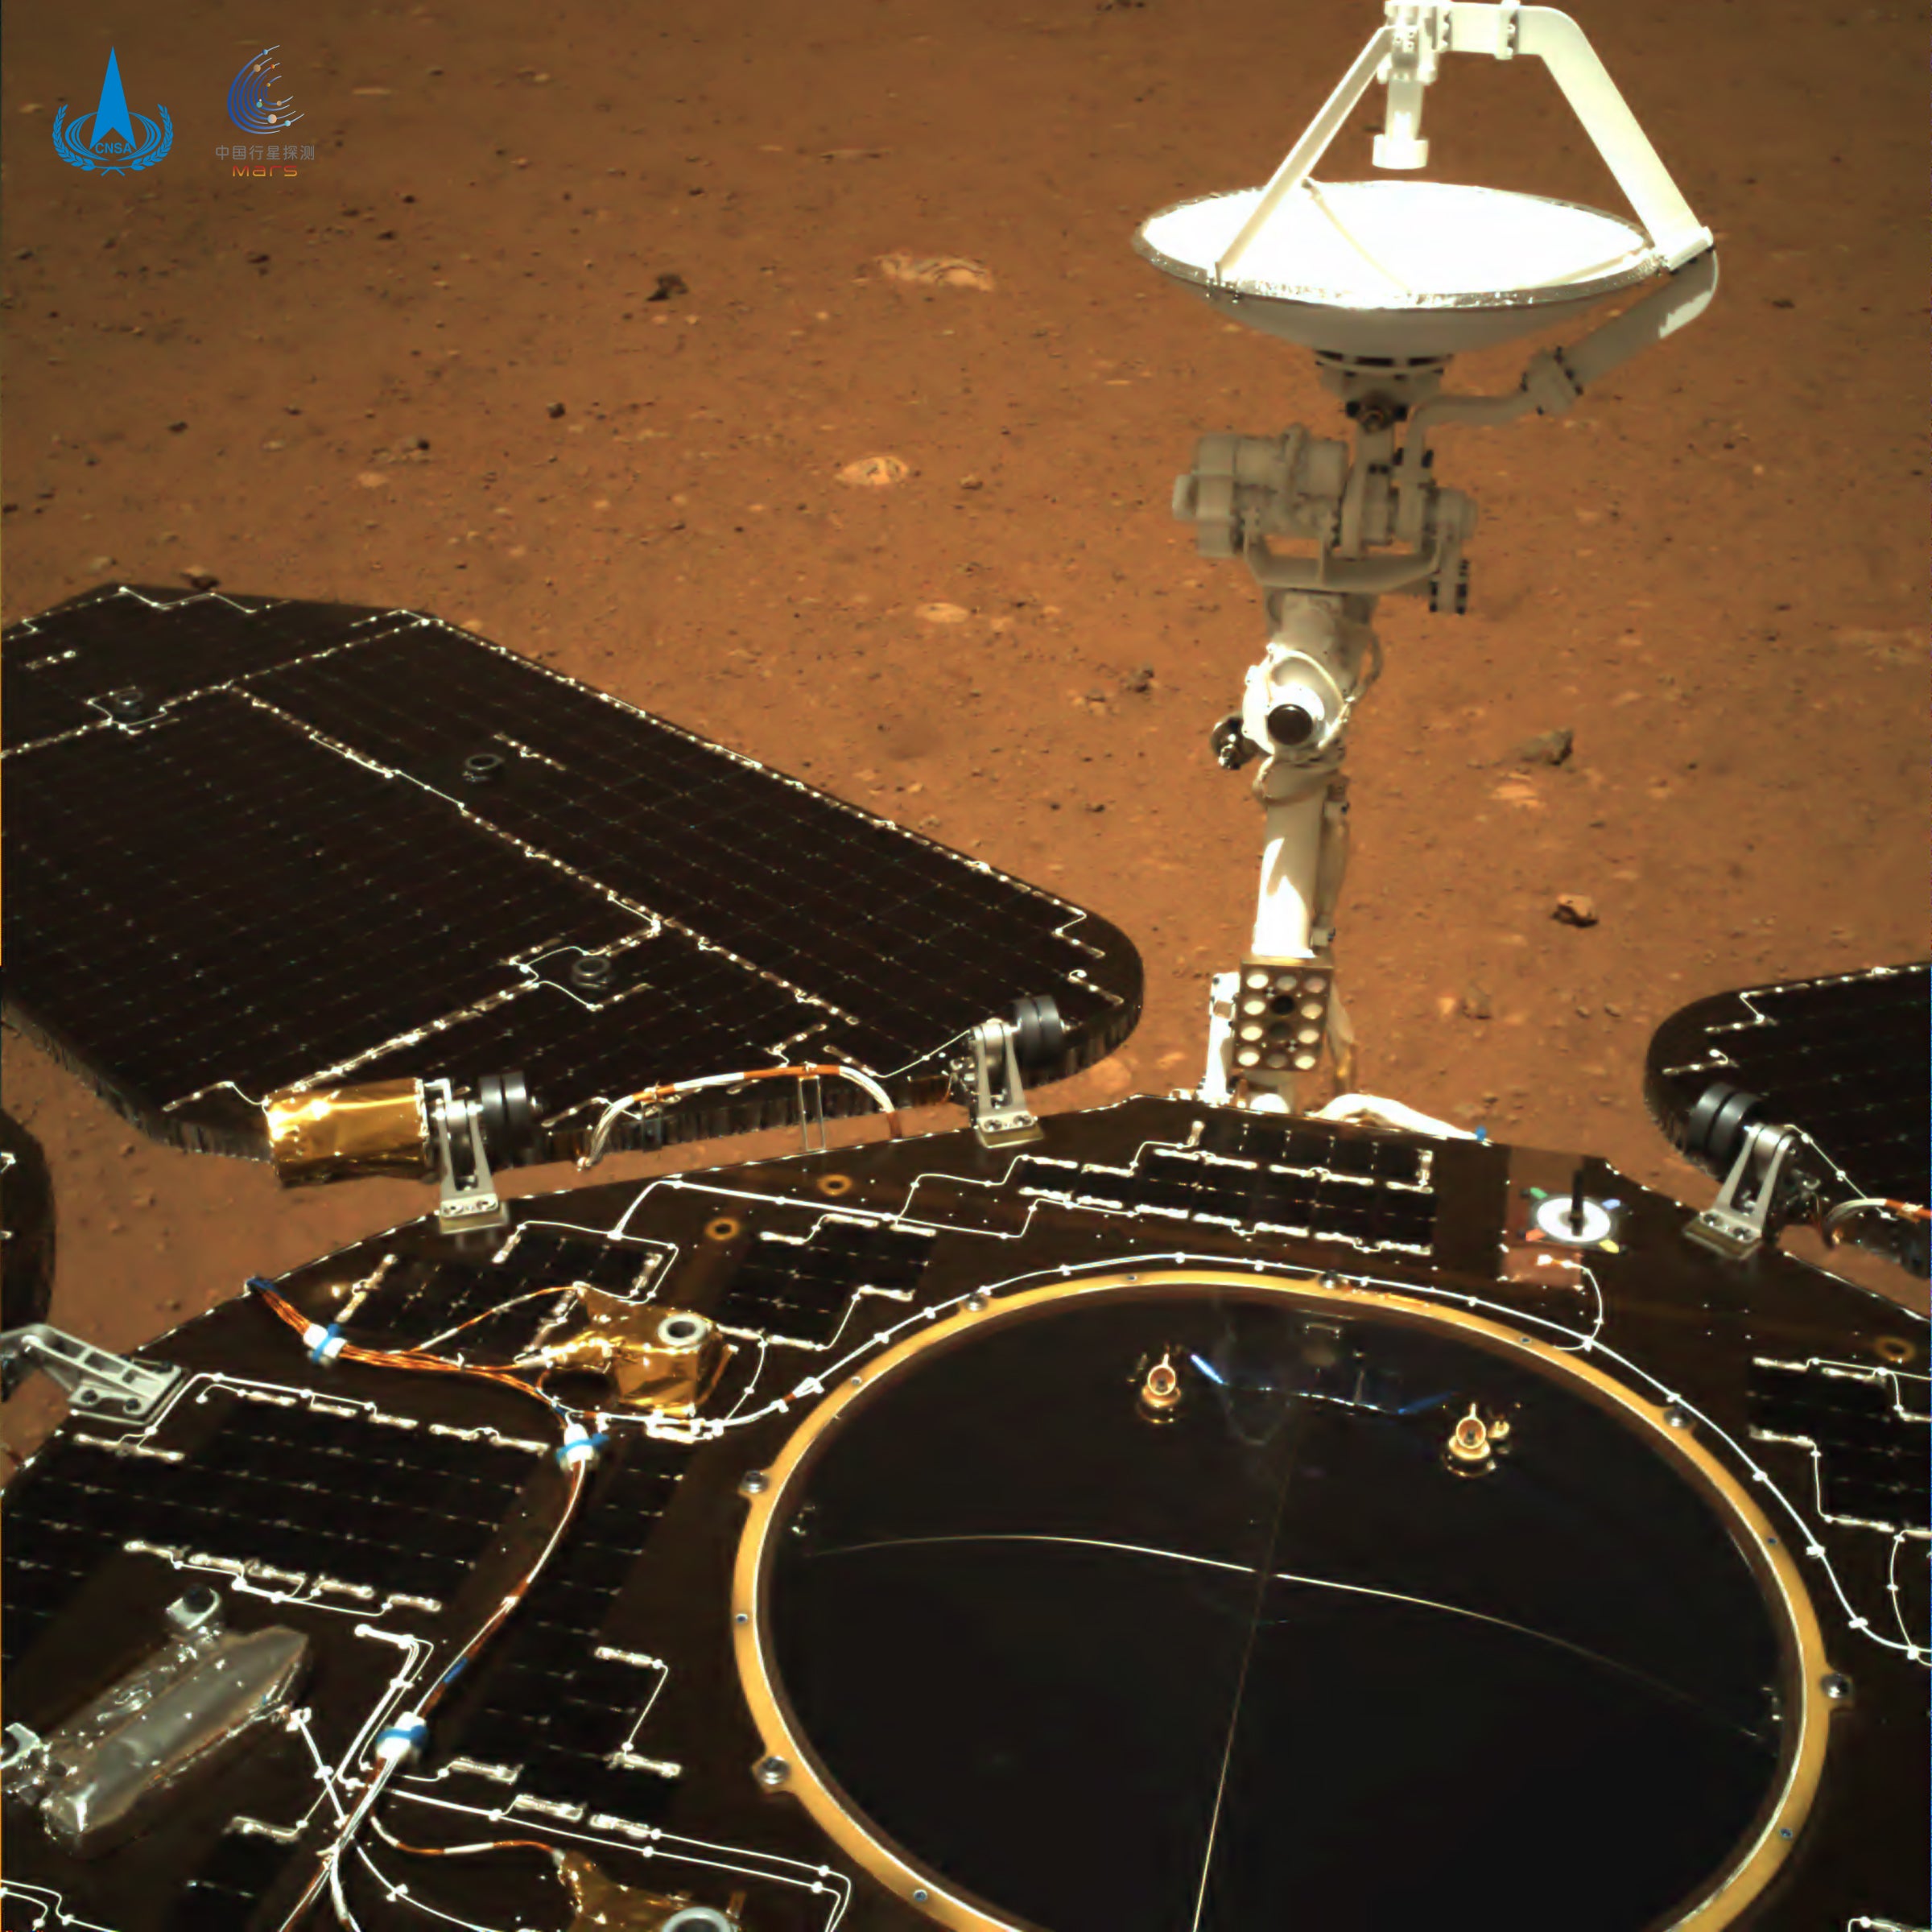 China’s Zhurong Rover Sends Back Its First Images of Mars